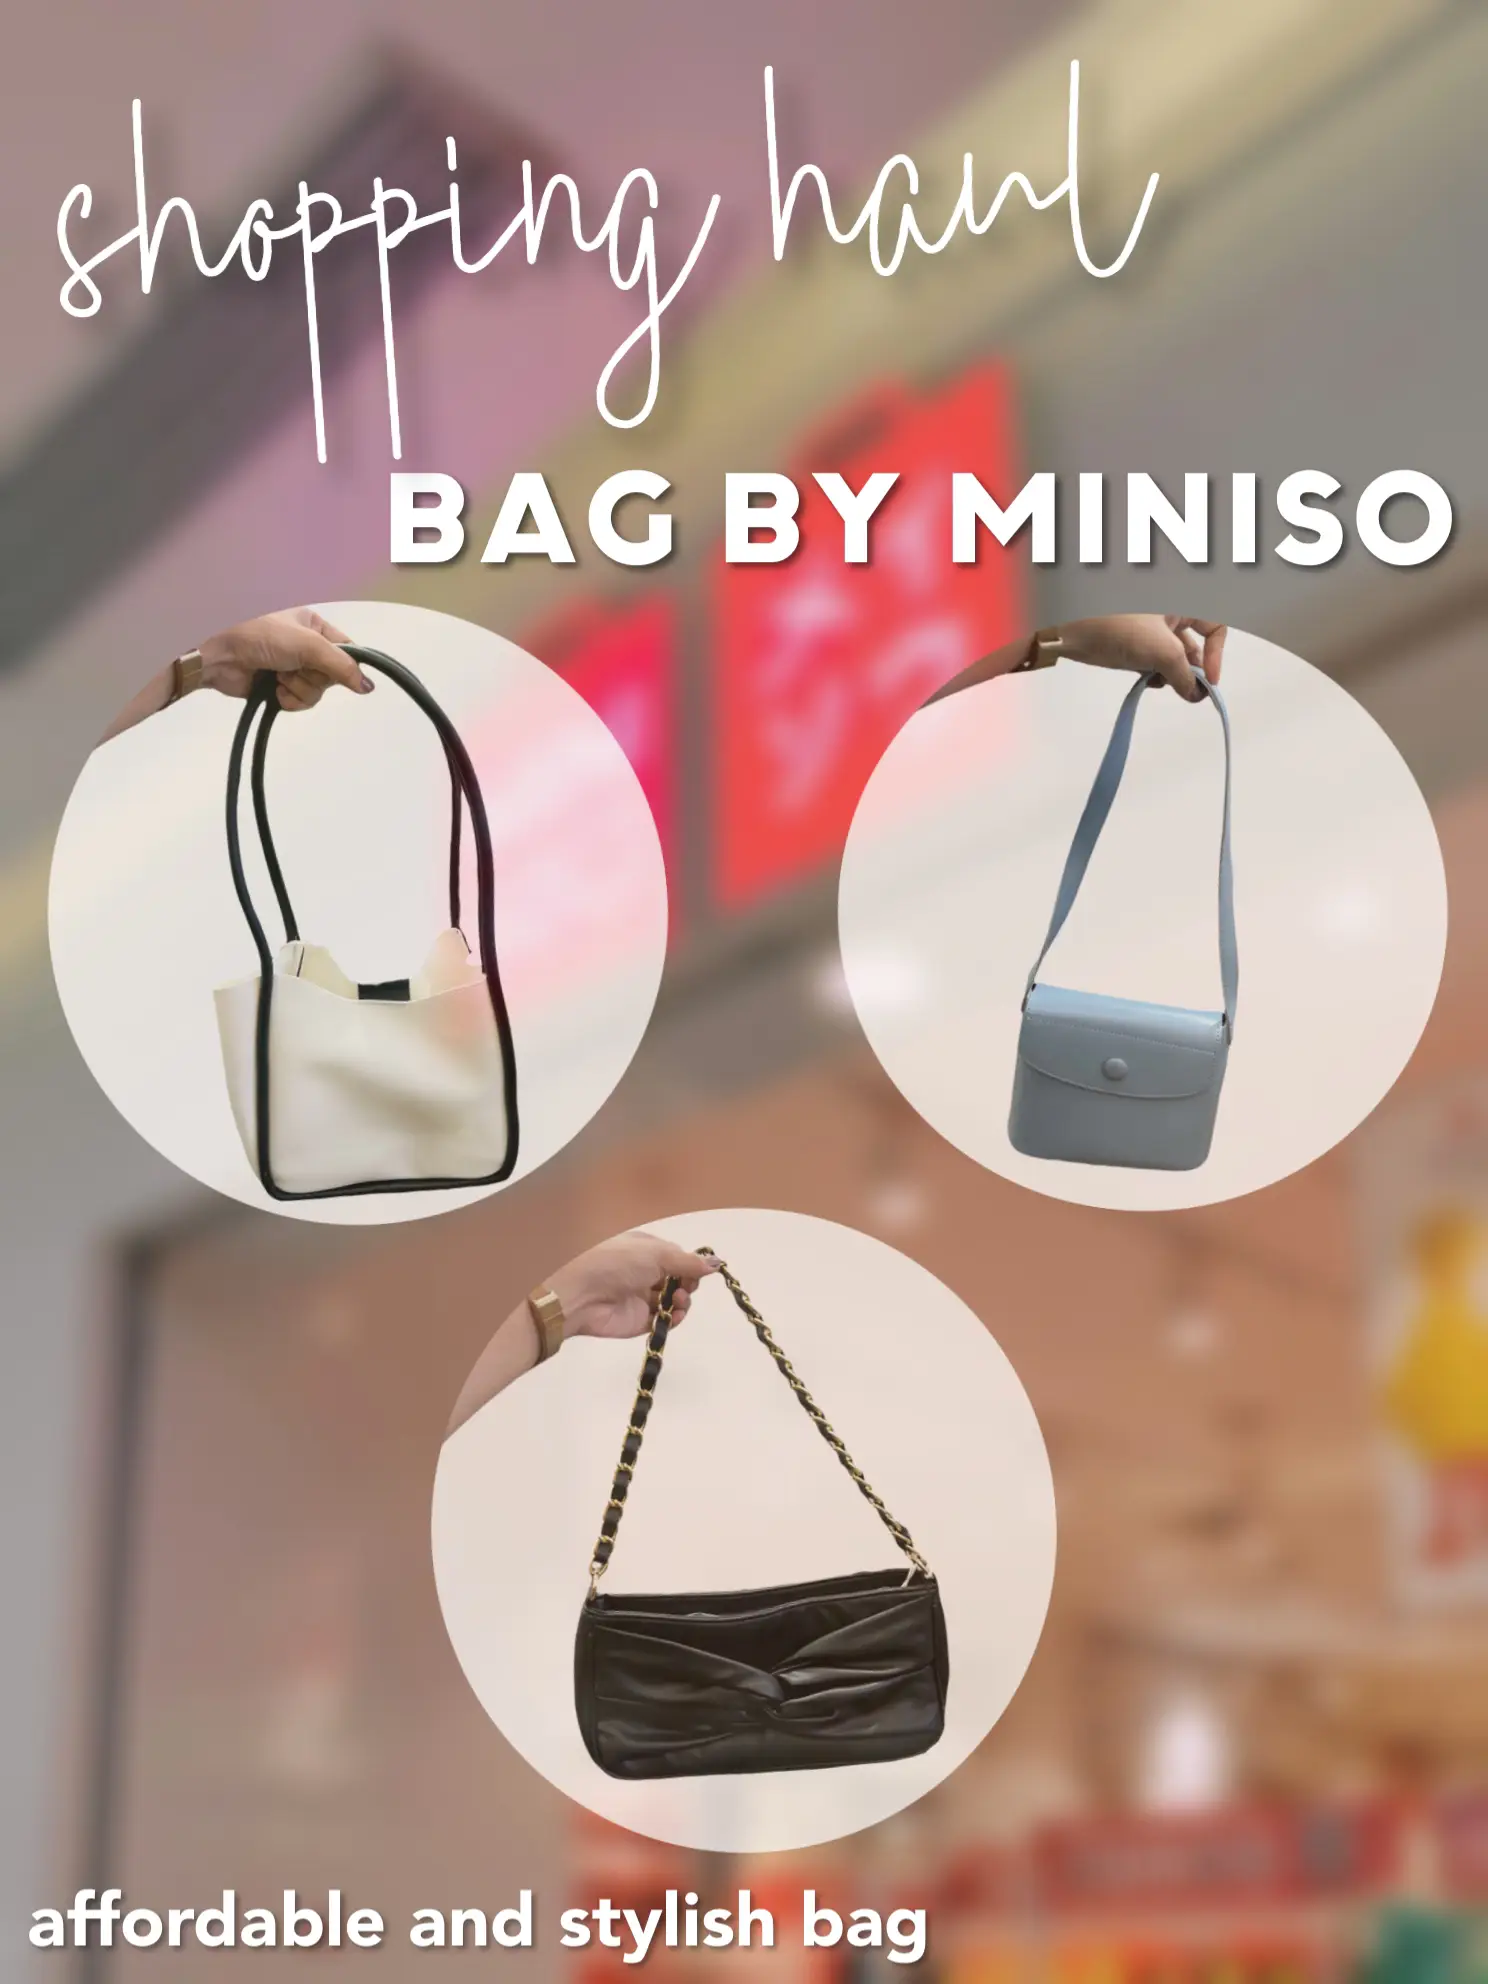 Miniso Haul - Bags - unbelievably affordable 